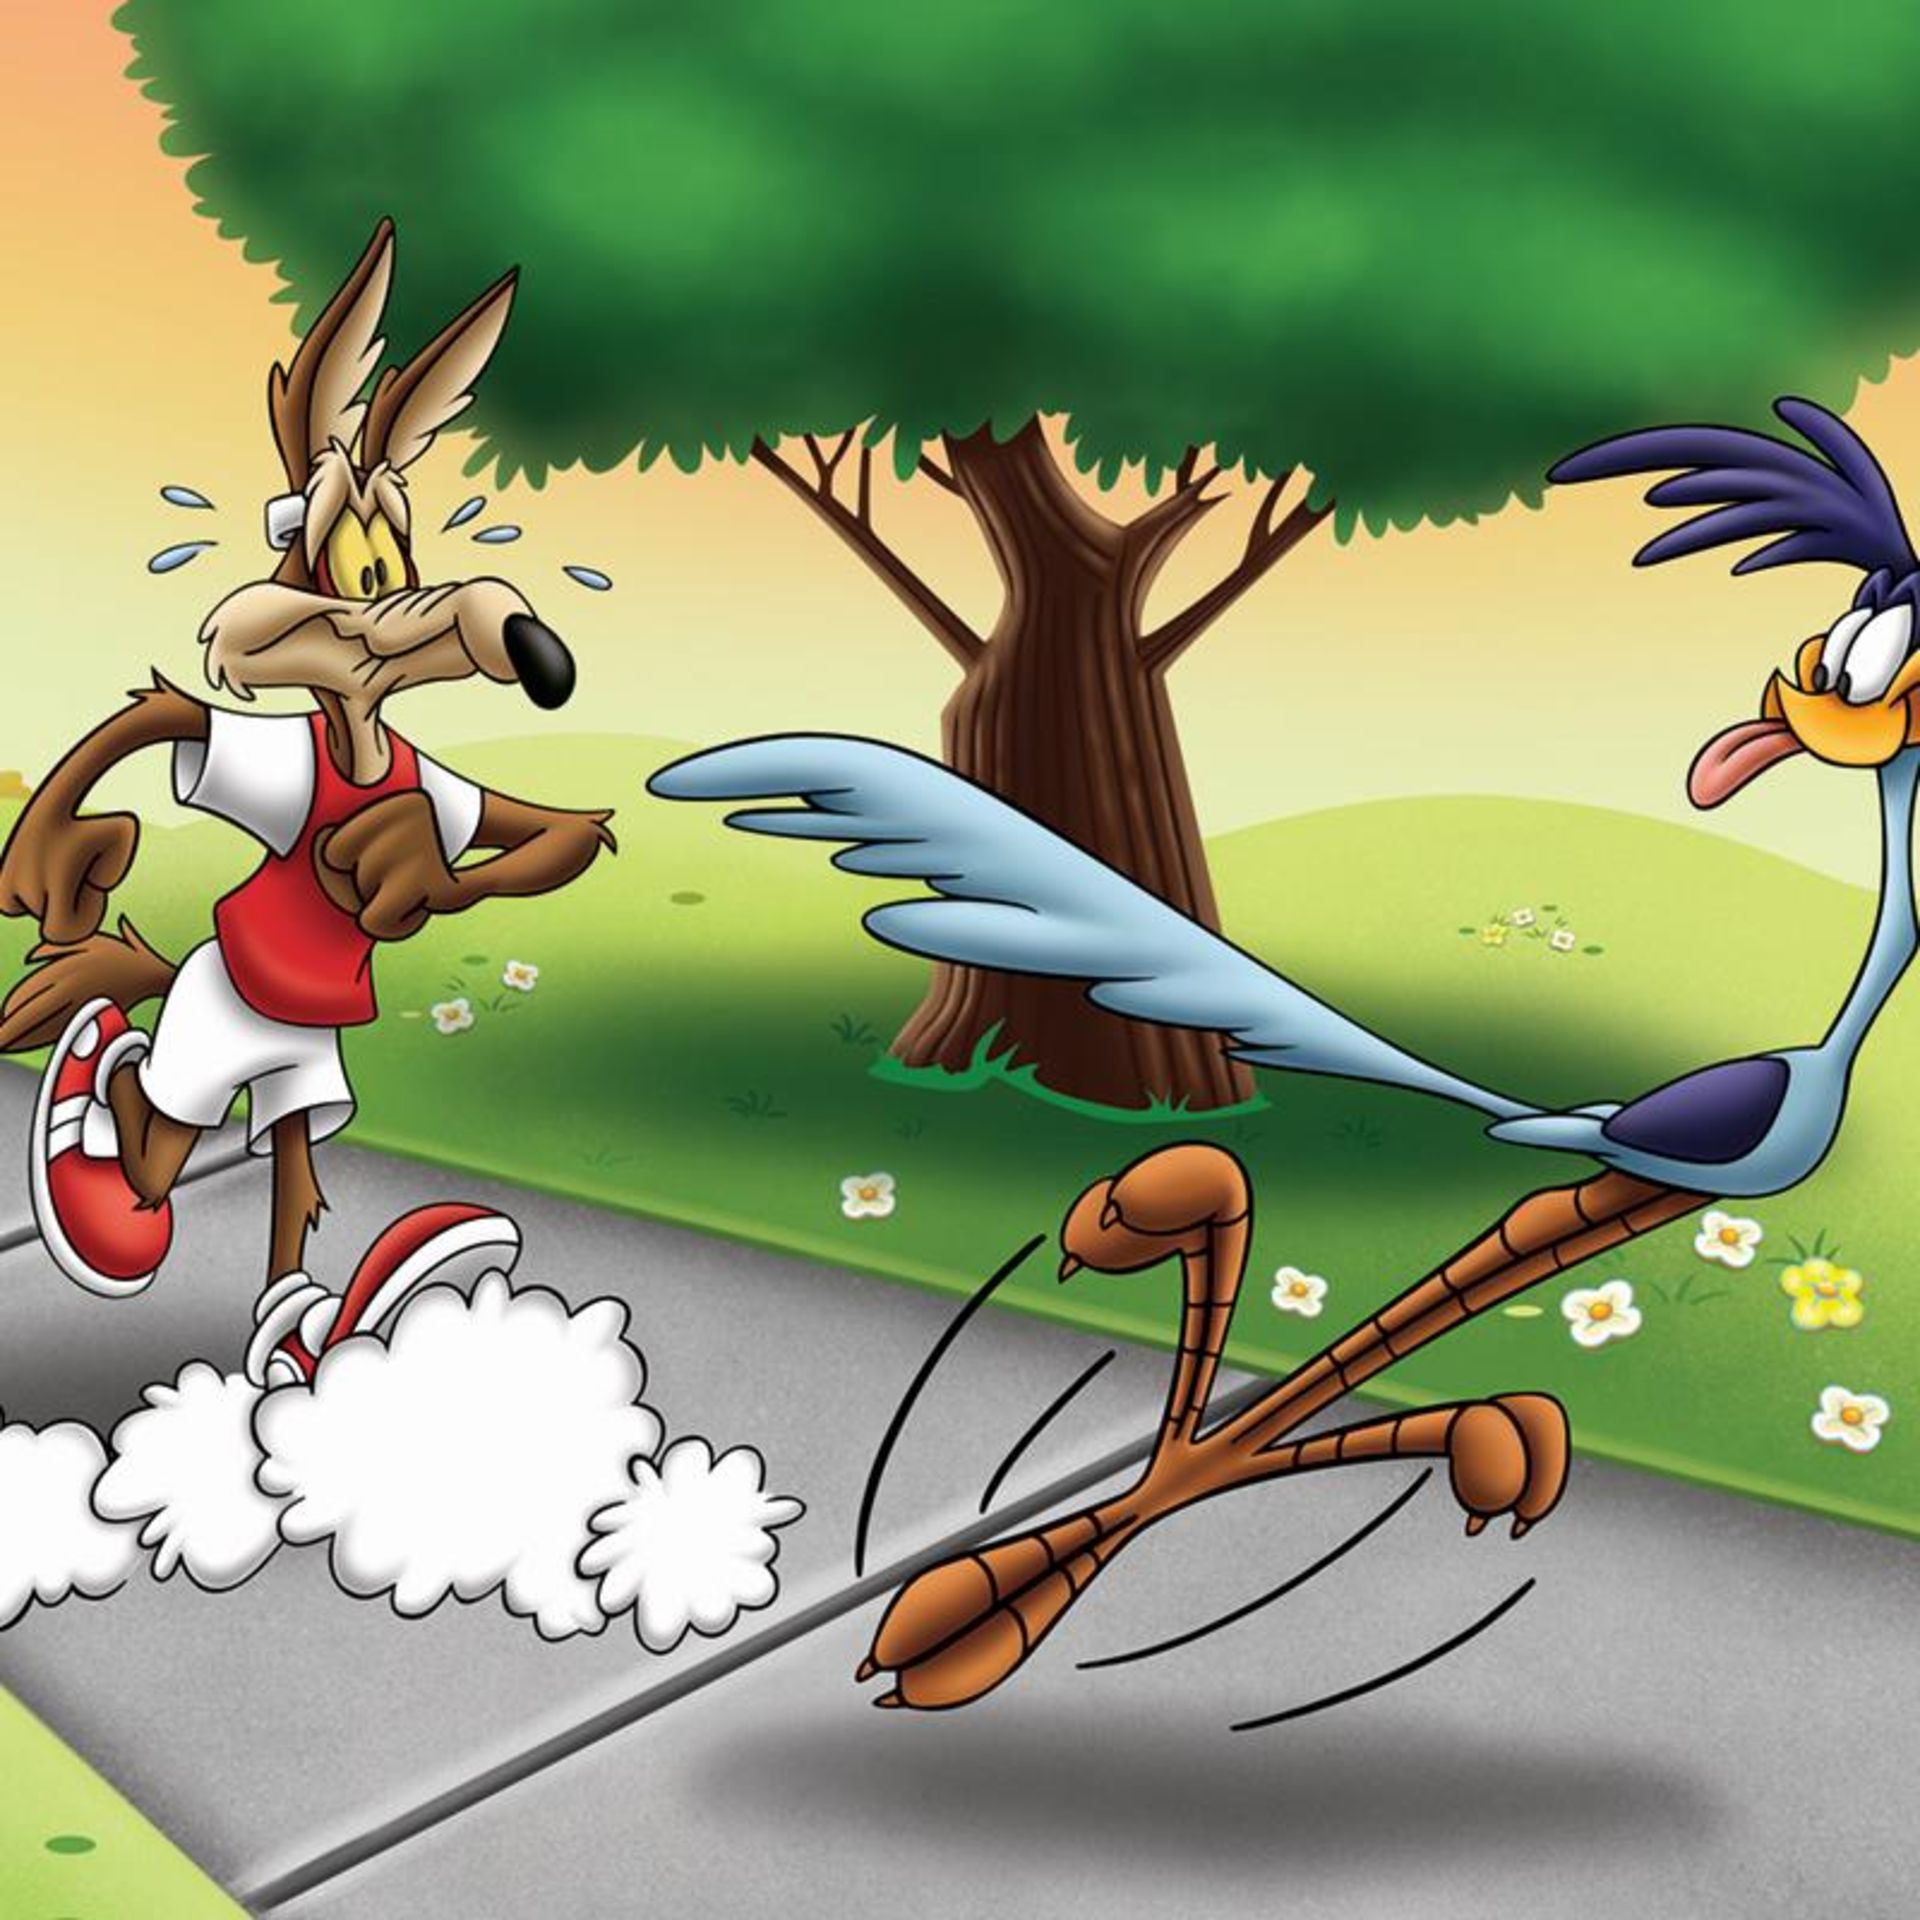 Wile E and Road Runner Race by Looney Tunes - Image 2 of 2